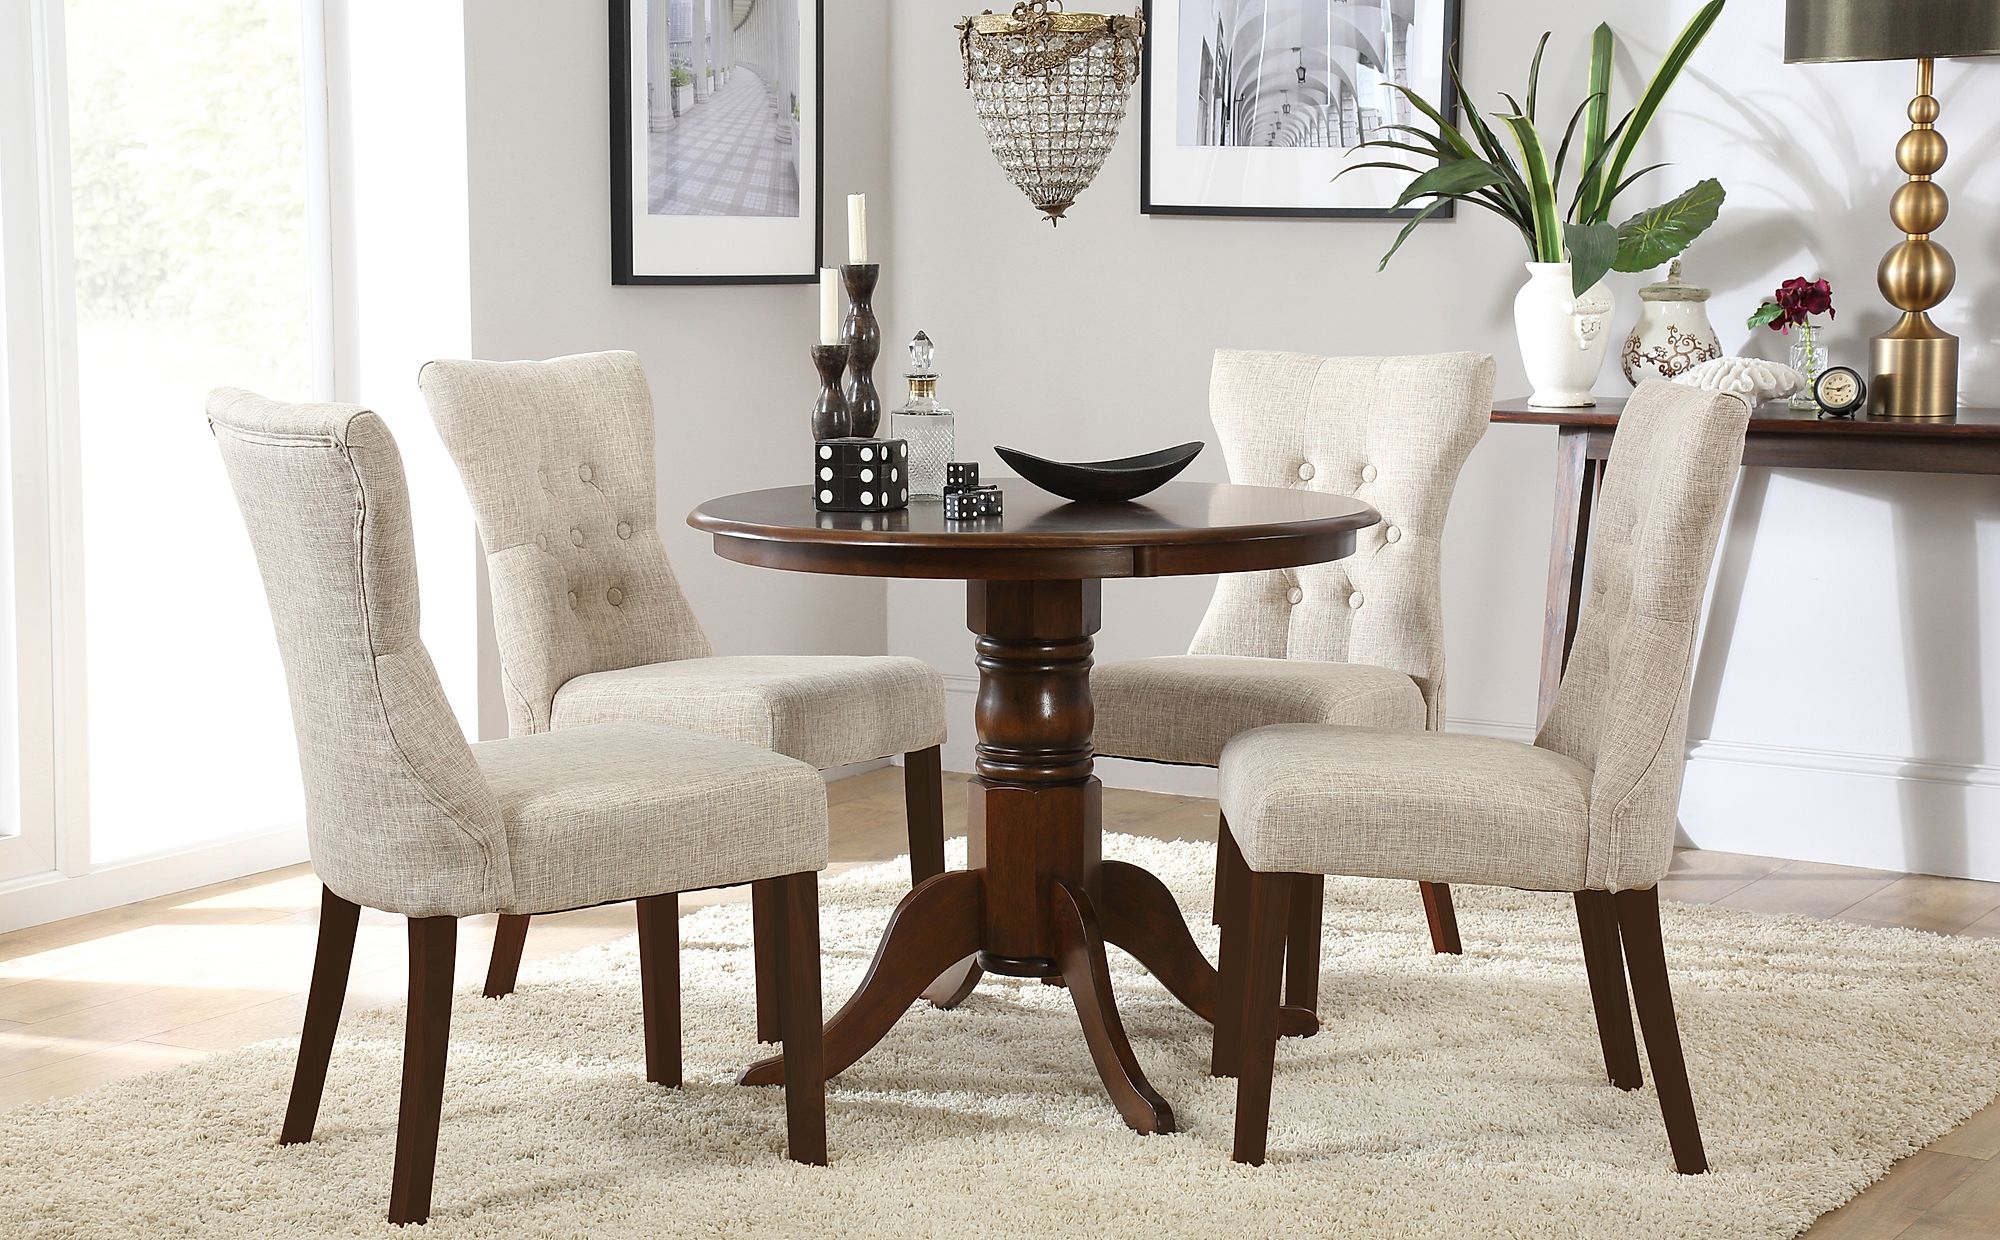 Kingston Round Dark Wood Dining Table With 4 Bewley Oatmeal Fabric